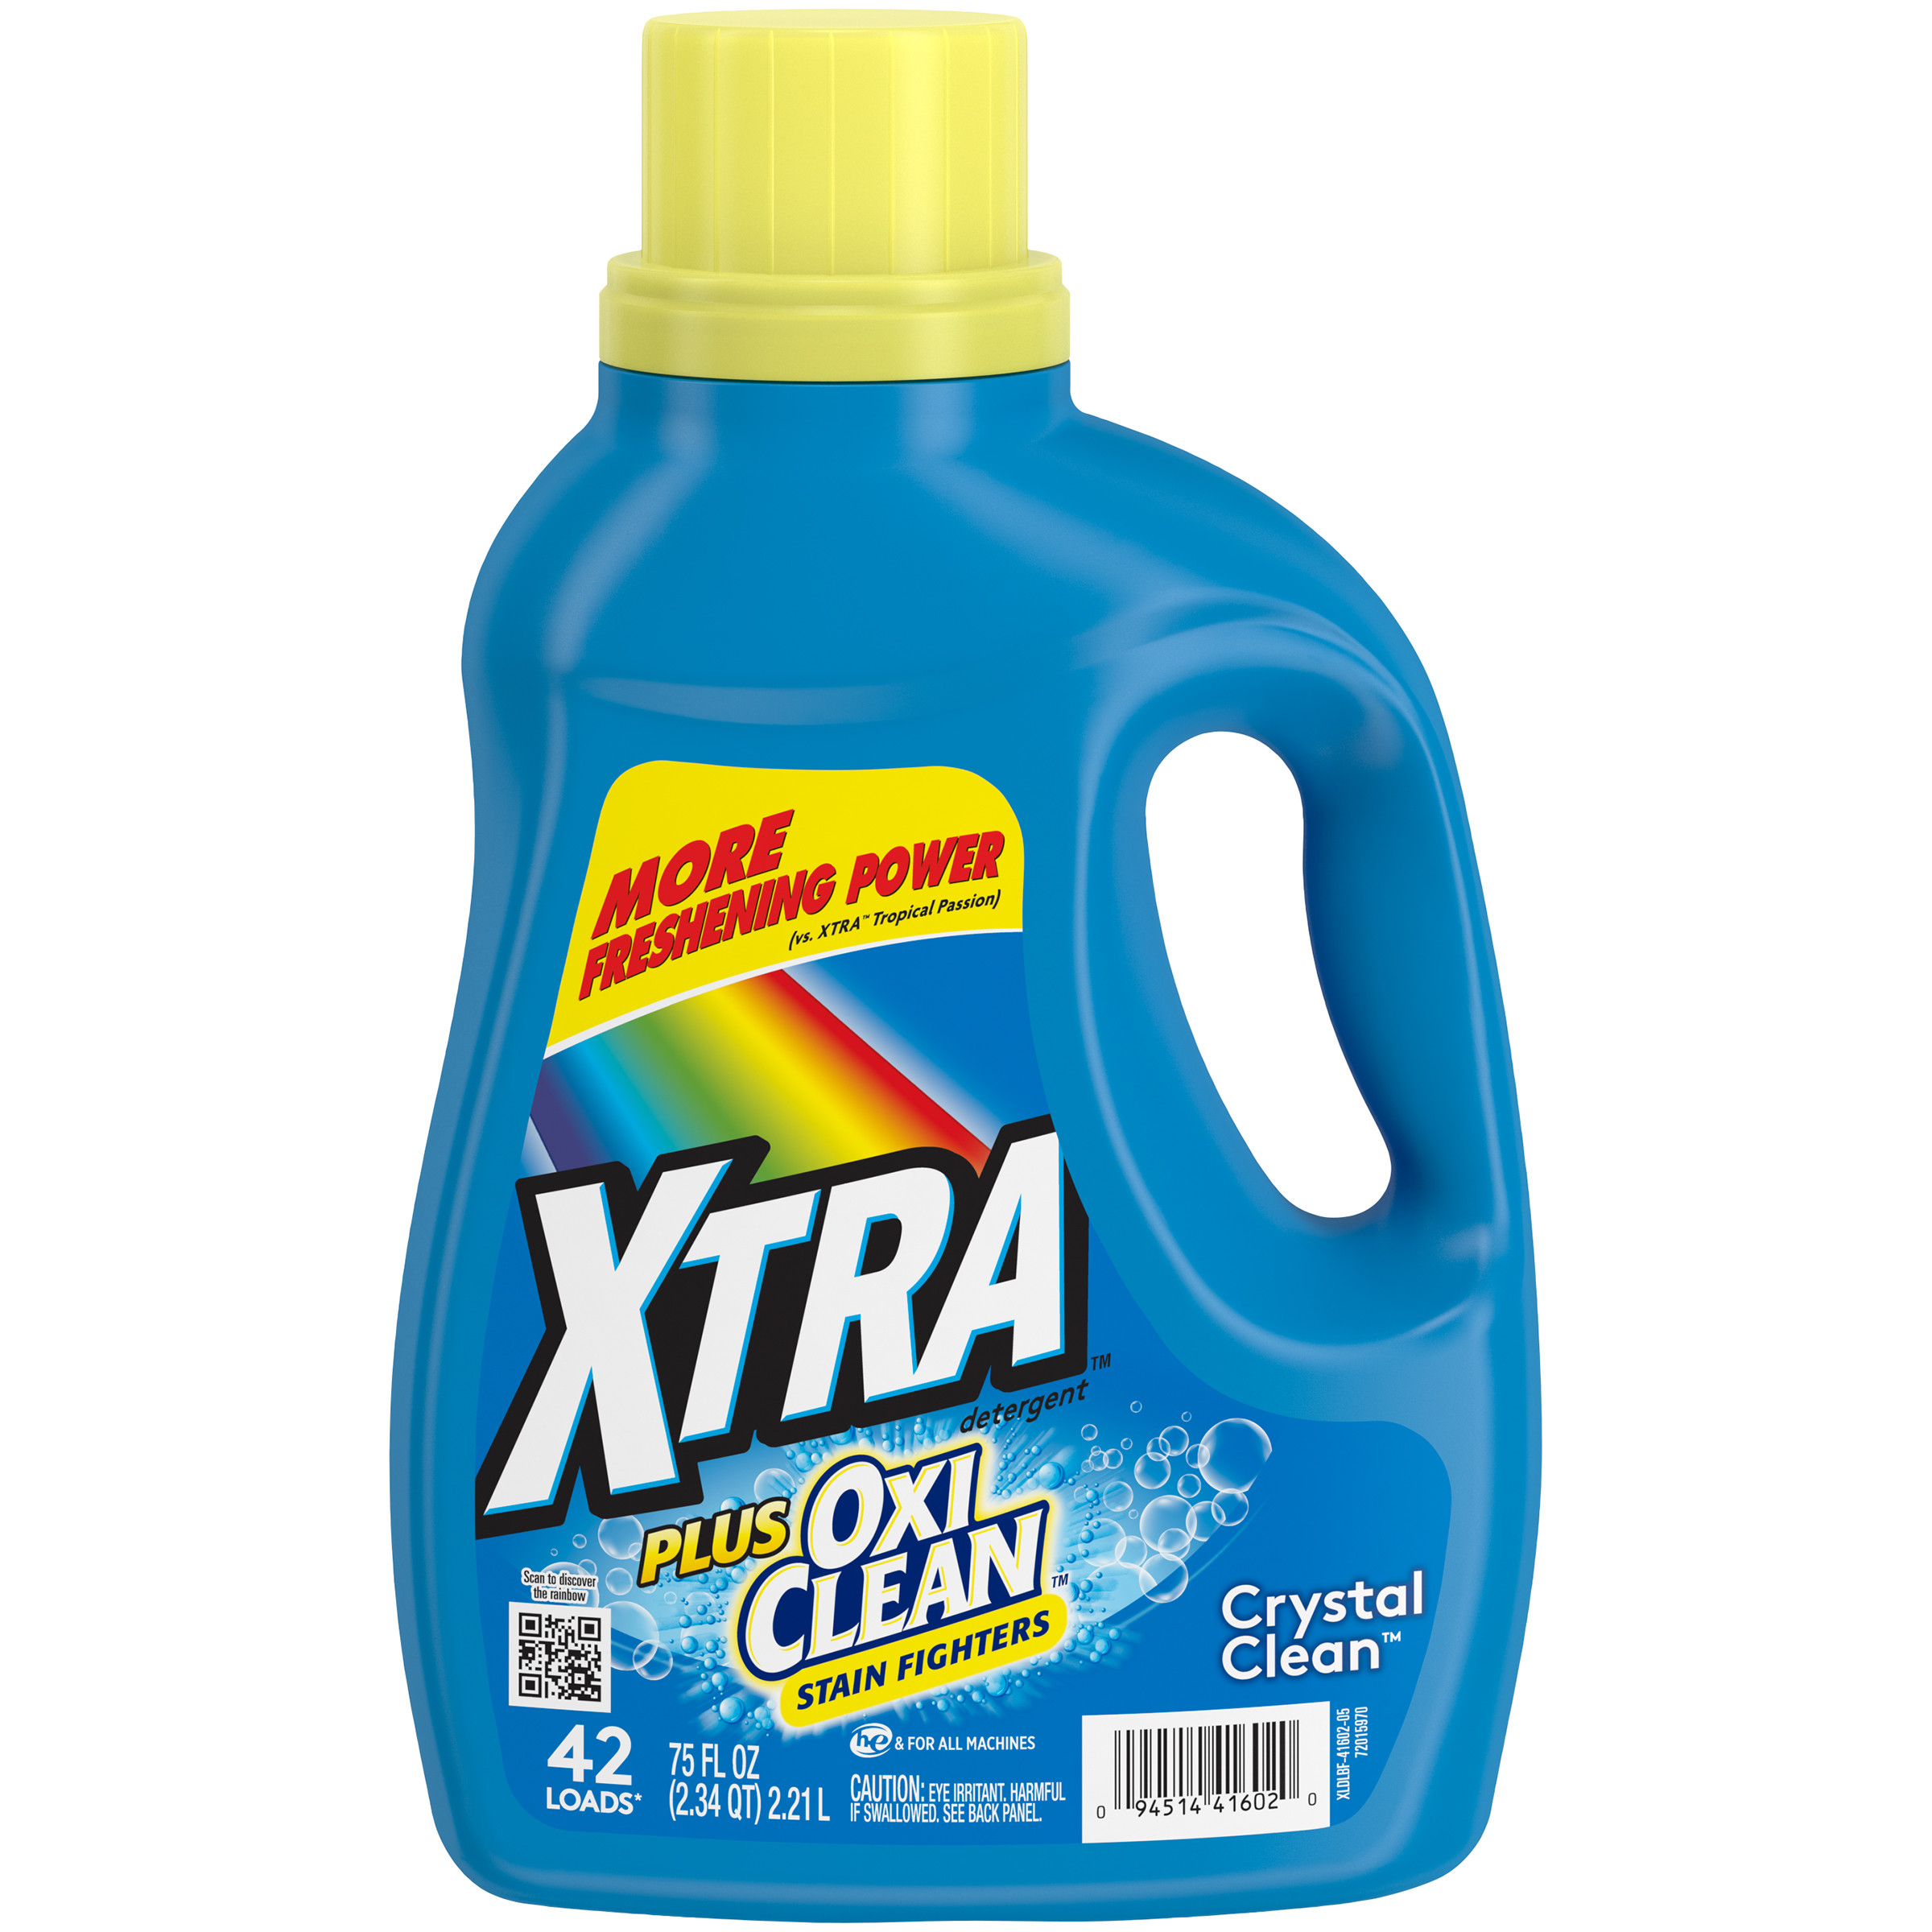 Xtra Plus OxiClean Liquid Laundry Detergent, Crystal Clean, 75oz - image 1 of 9